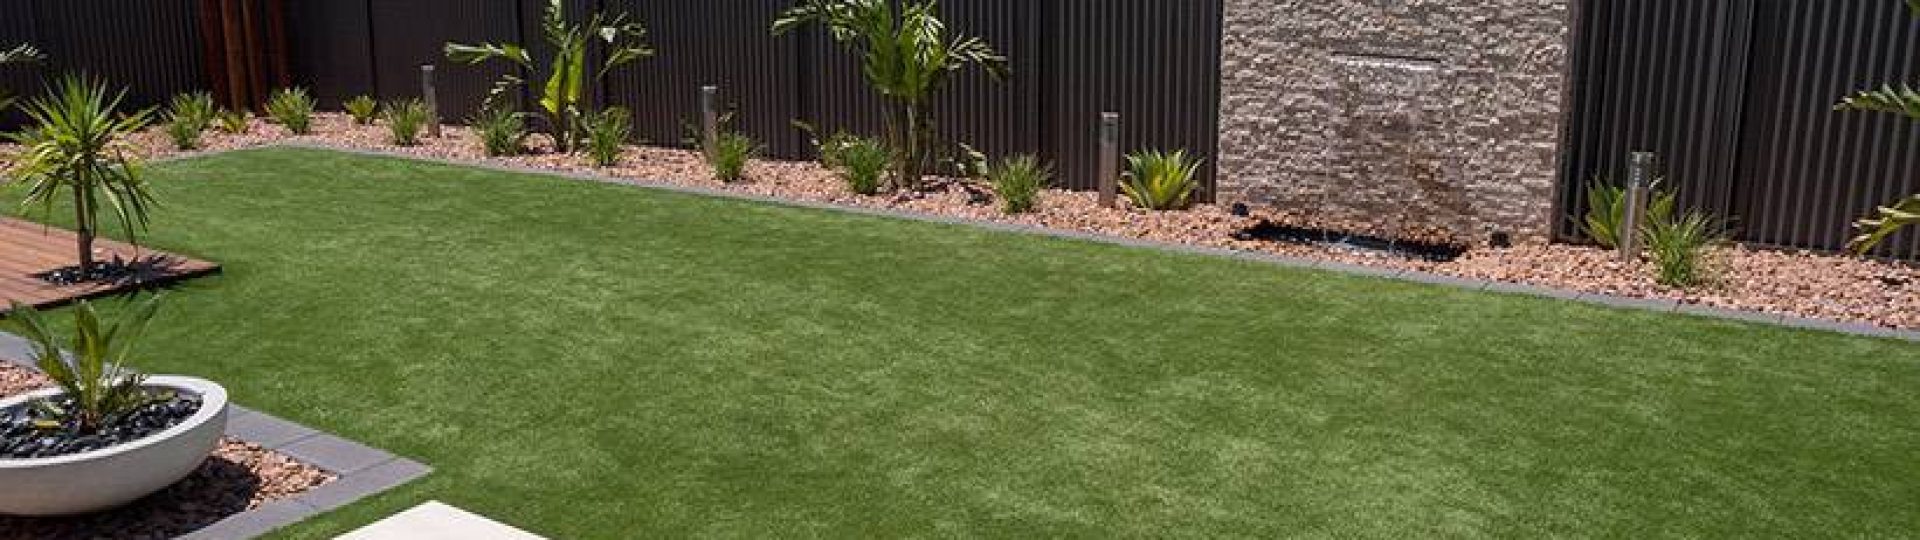 Artificial Grass Lawns - Where can it be installed?